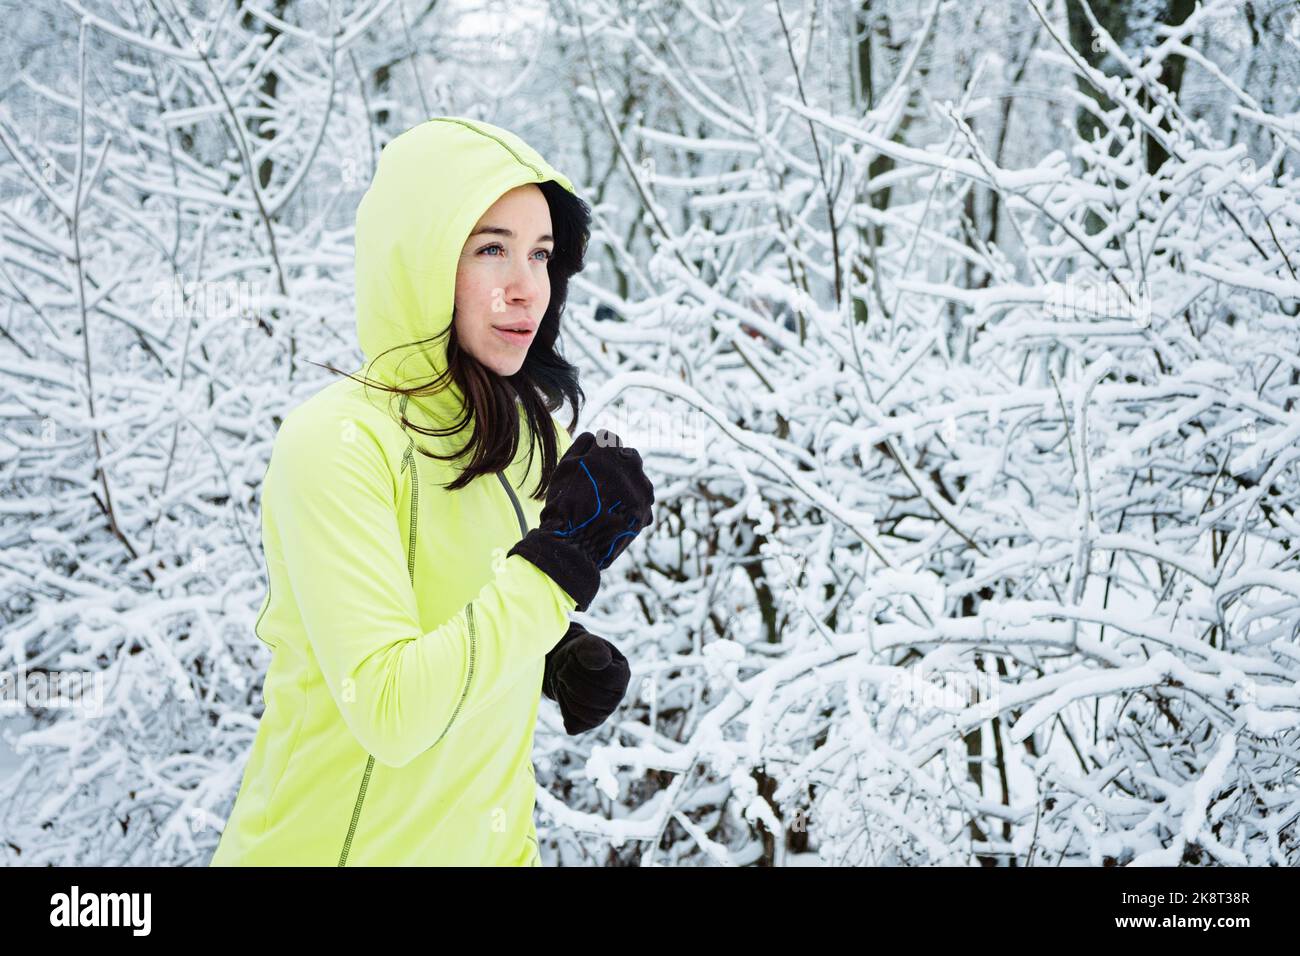 Cold Weather Running. Happy woman running in winter snowy park, forest. Running athlete woman sprinting during winter training outside in cold snow Stock Photo